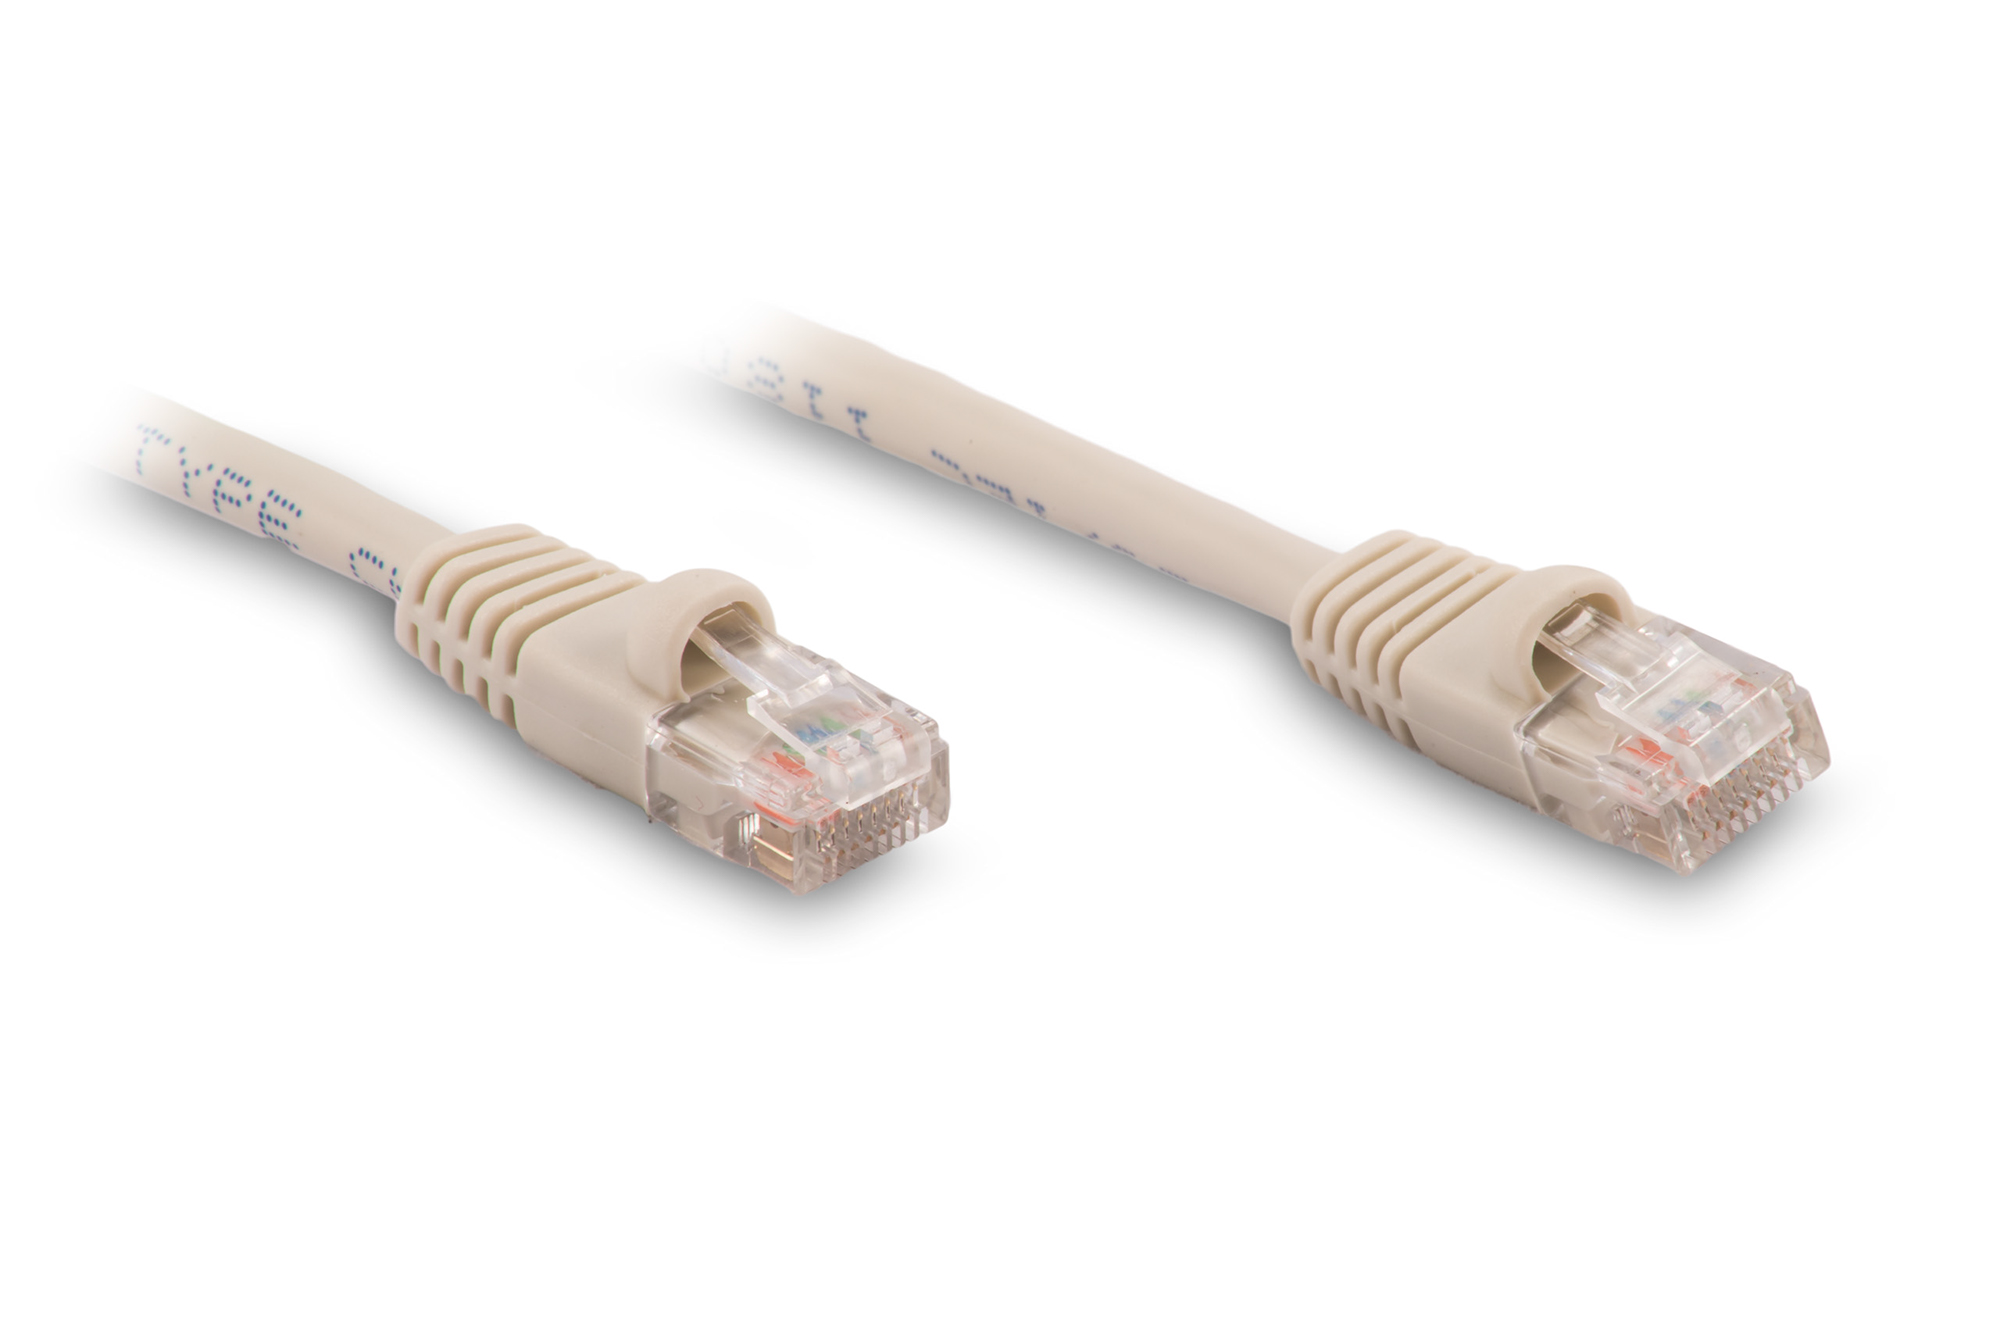 14ft Cat5e Ethernet Patch Cable - Gray Color - Snagless Boot, Stranded, RJ45, 350Mhz, 24AWG